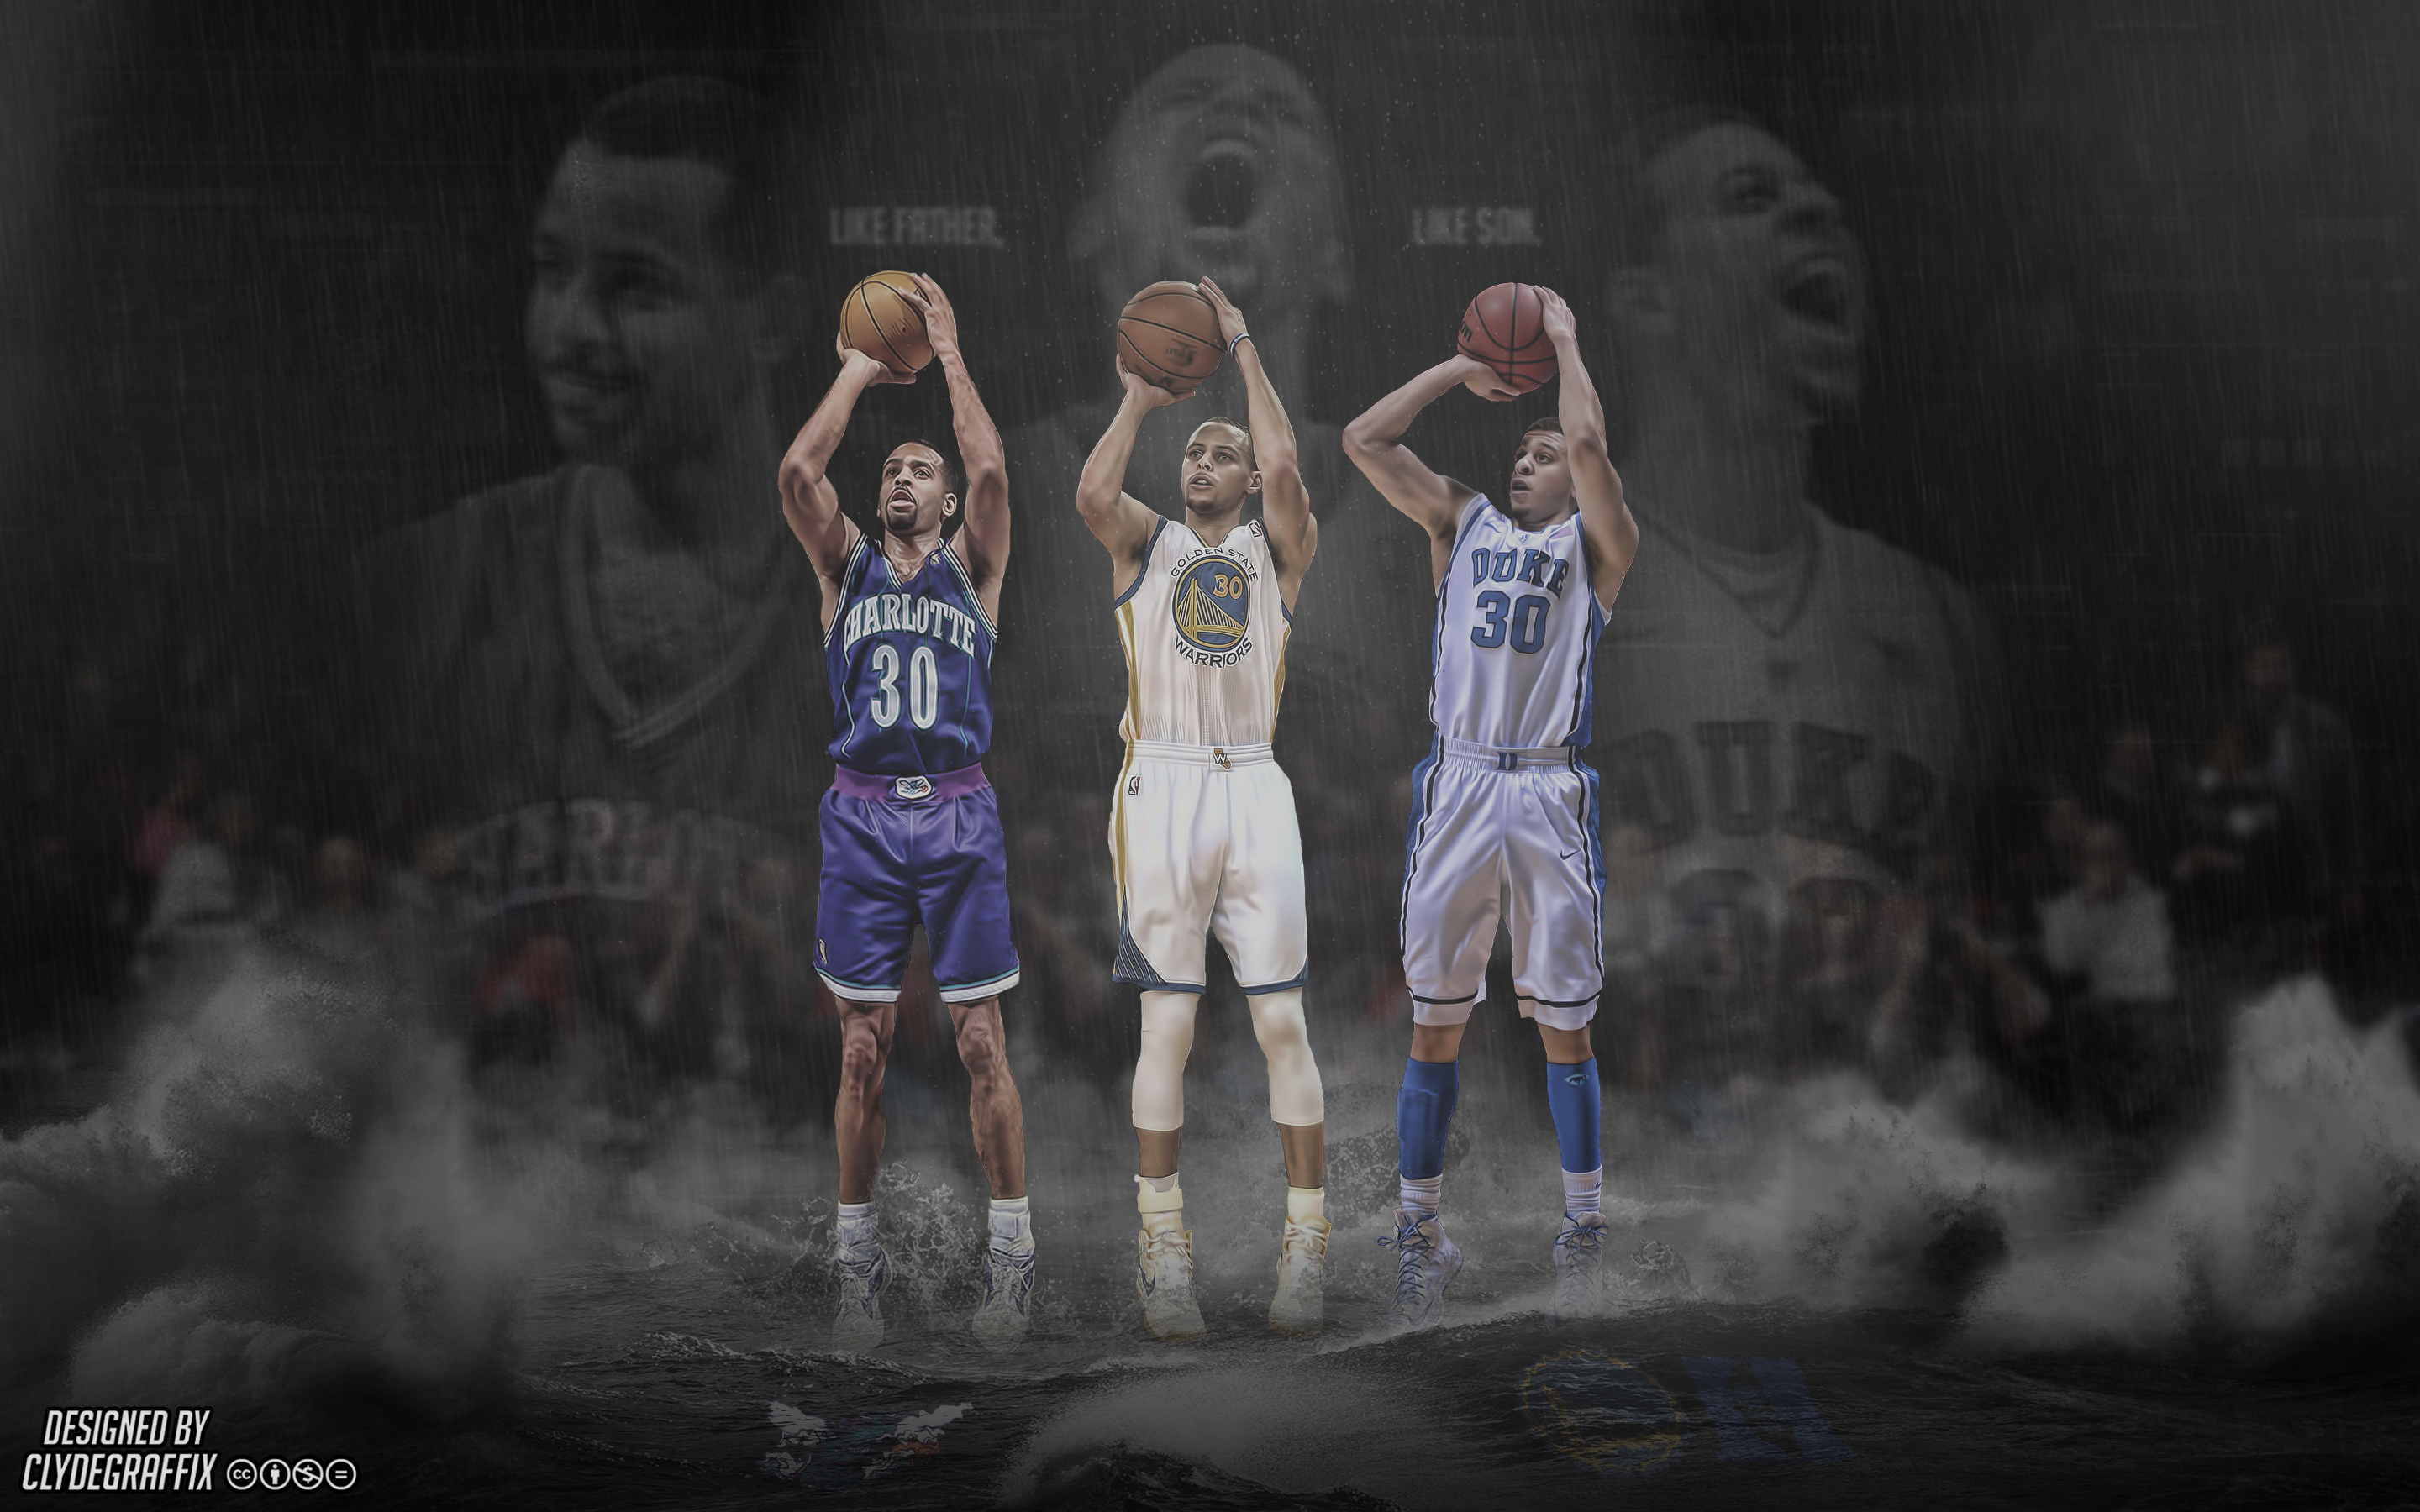 Recently made a wallpaper of the Curry family that I thought you guys